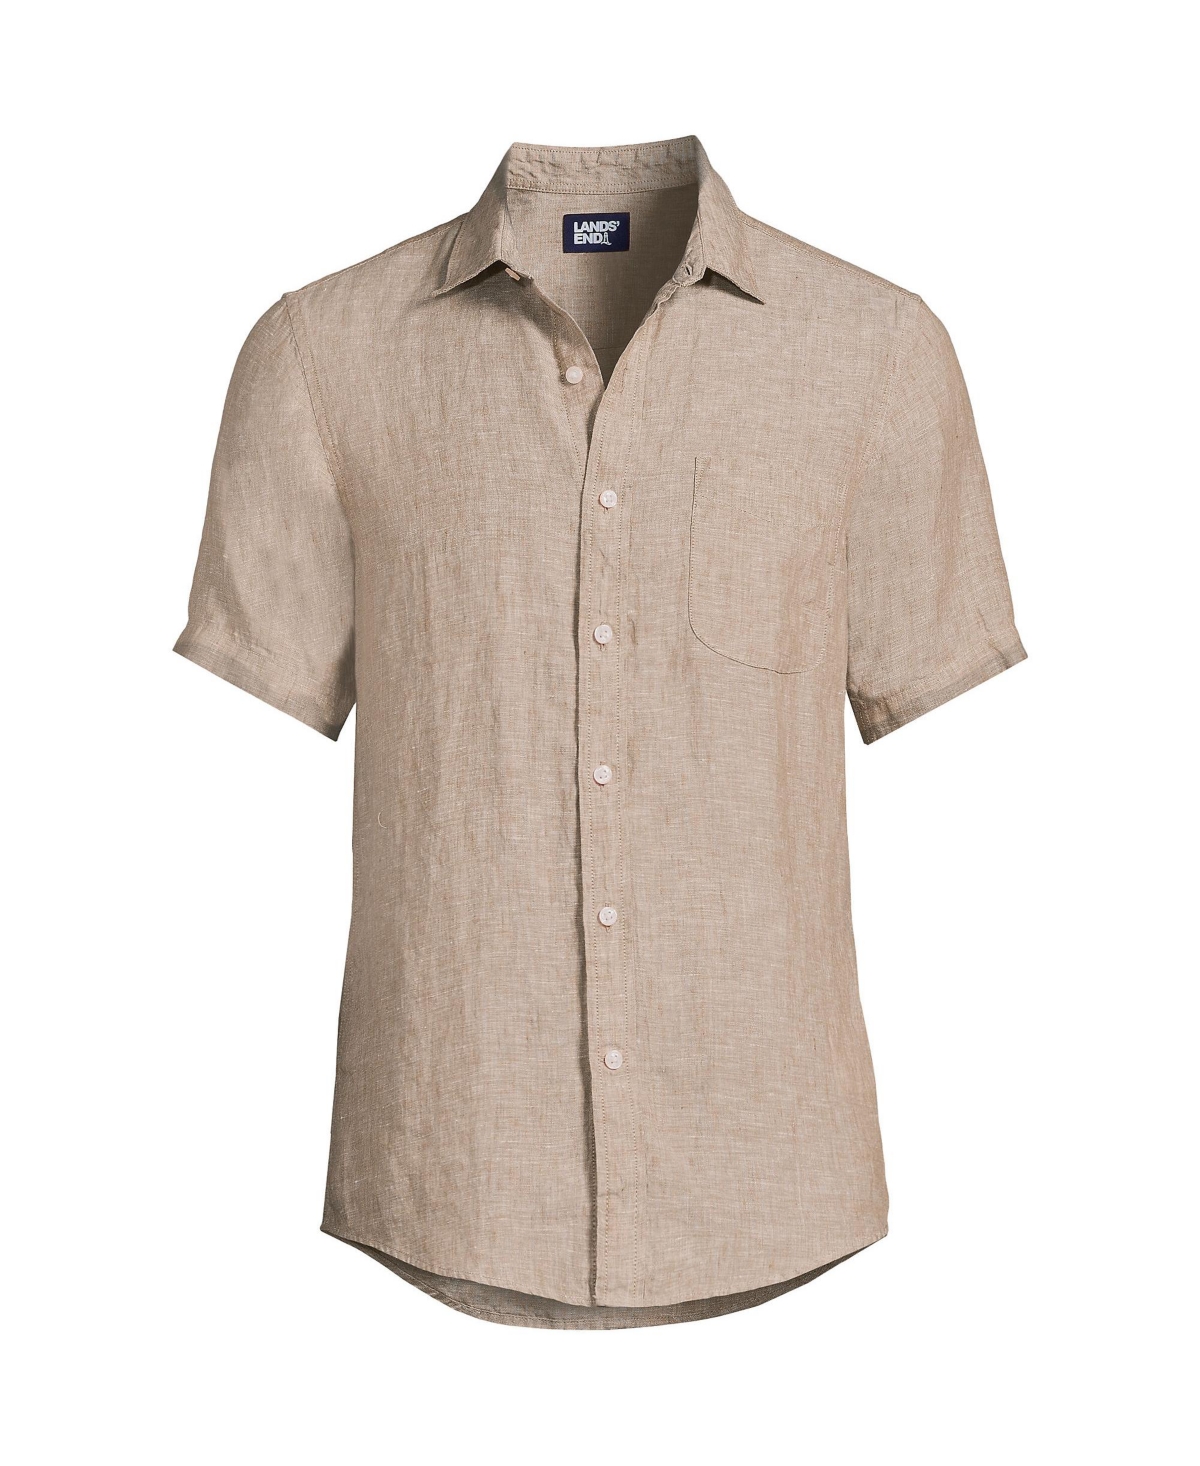 Big & Tall Traditional Fit Short Sleeve Linen Shirt - Chicory blue